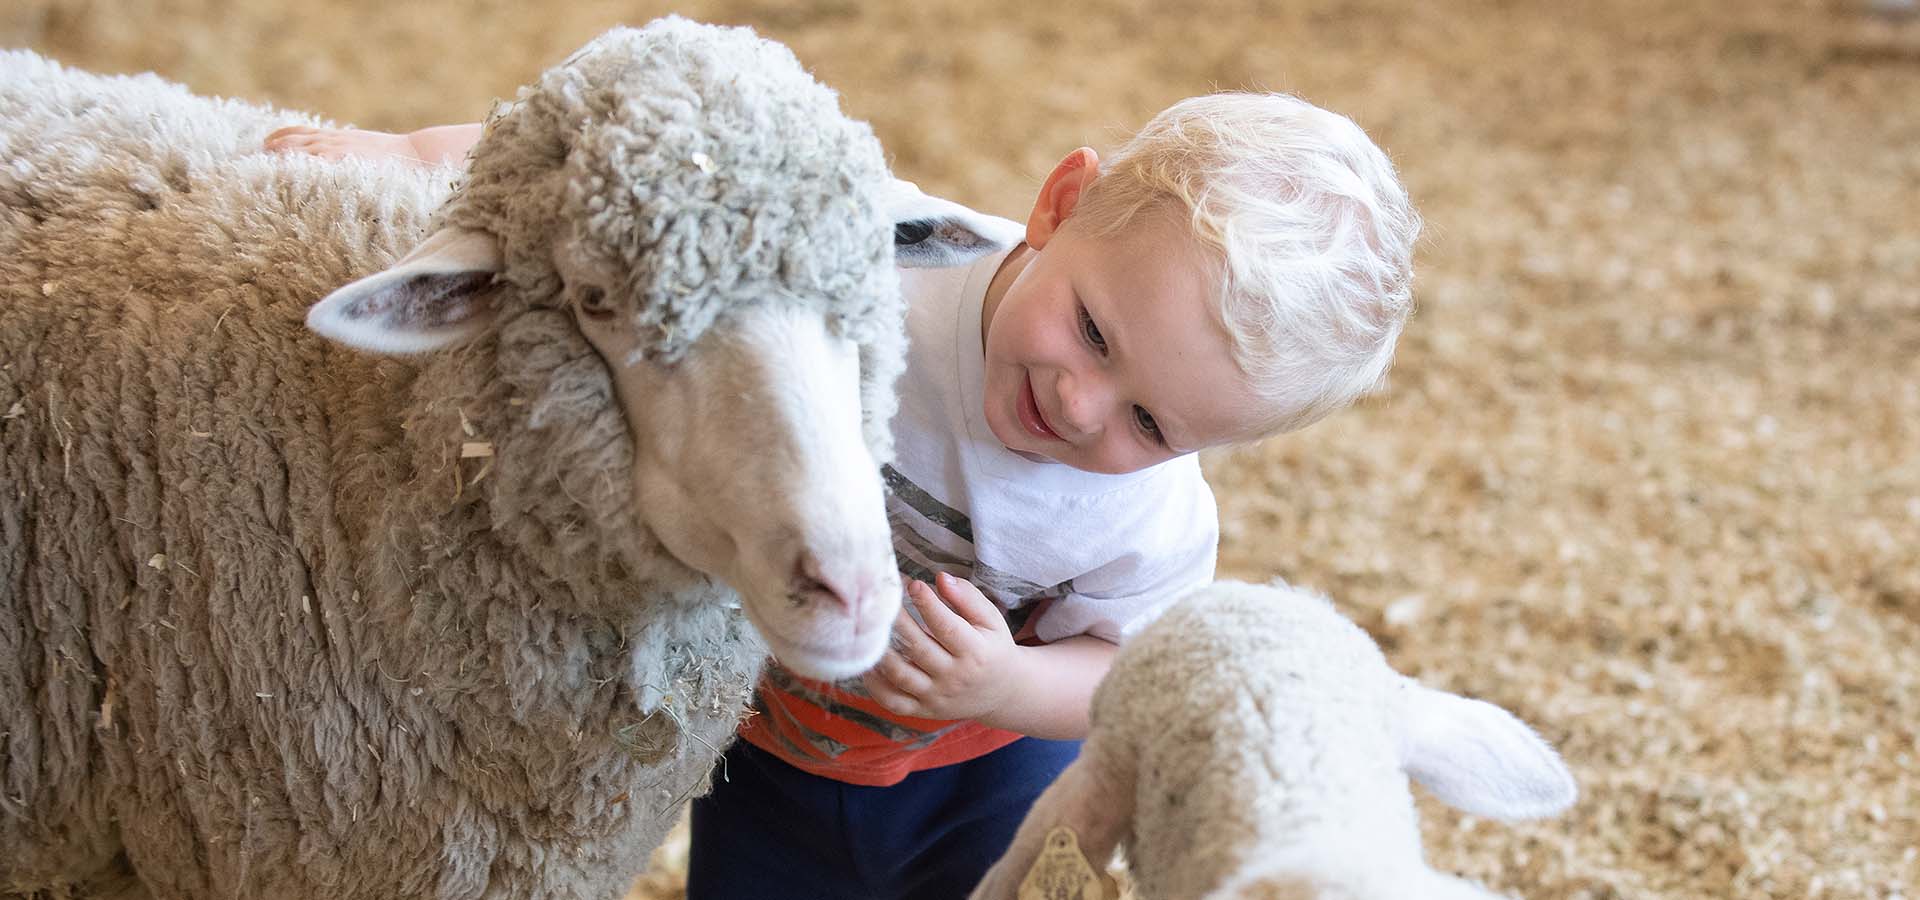 A toddler says hello to a sheep